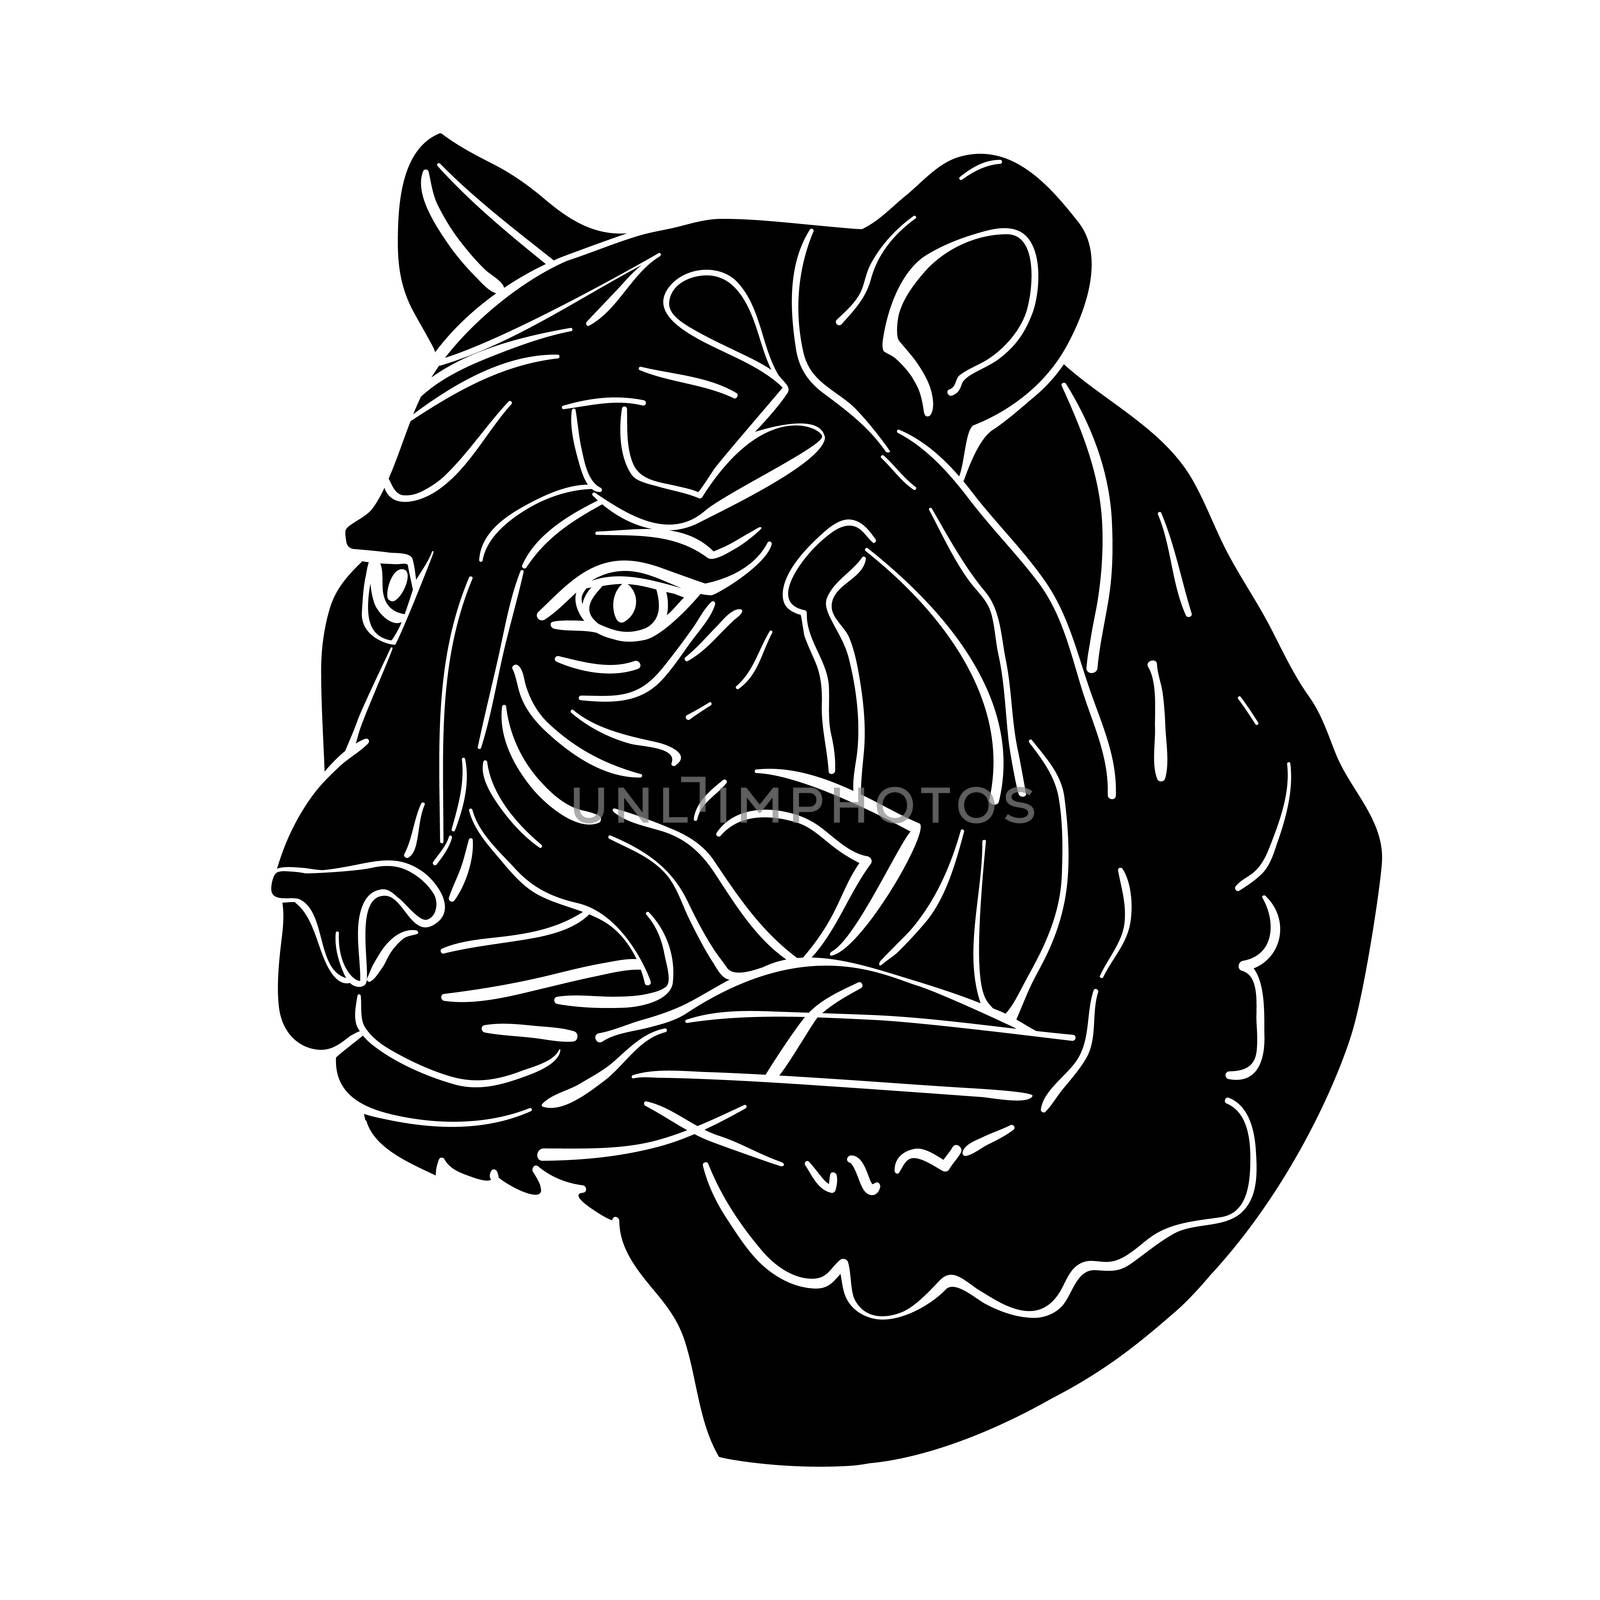 Tiger head avatar, Chinese zodiac sign illustration, black silhouette isolated on white